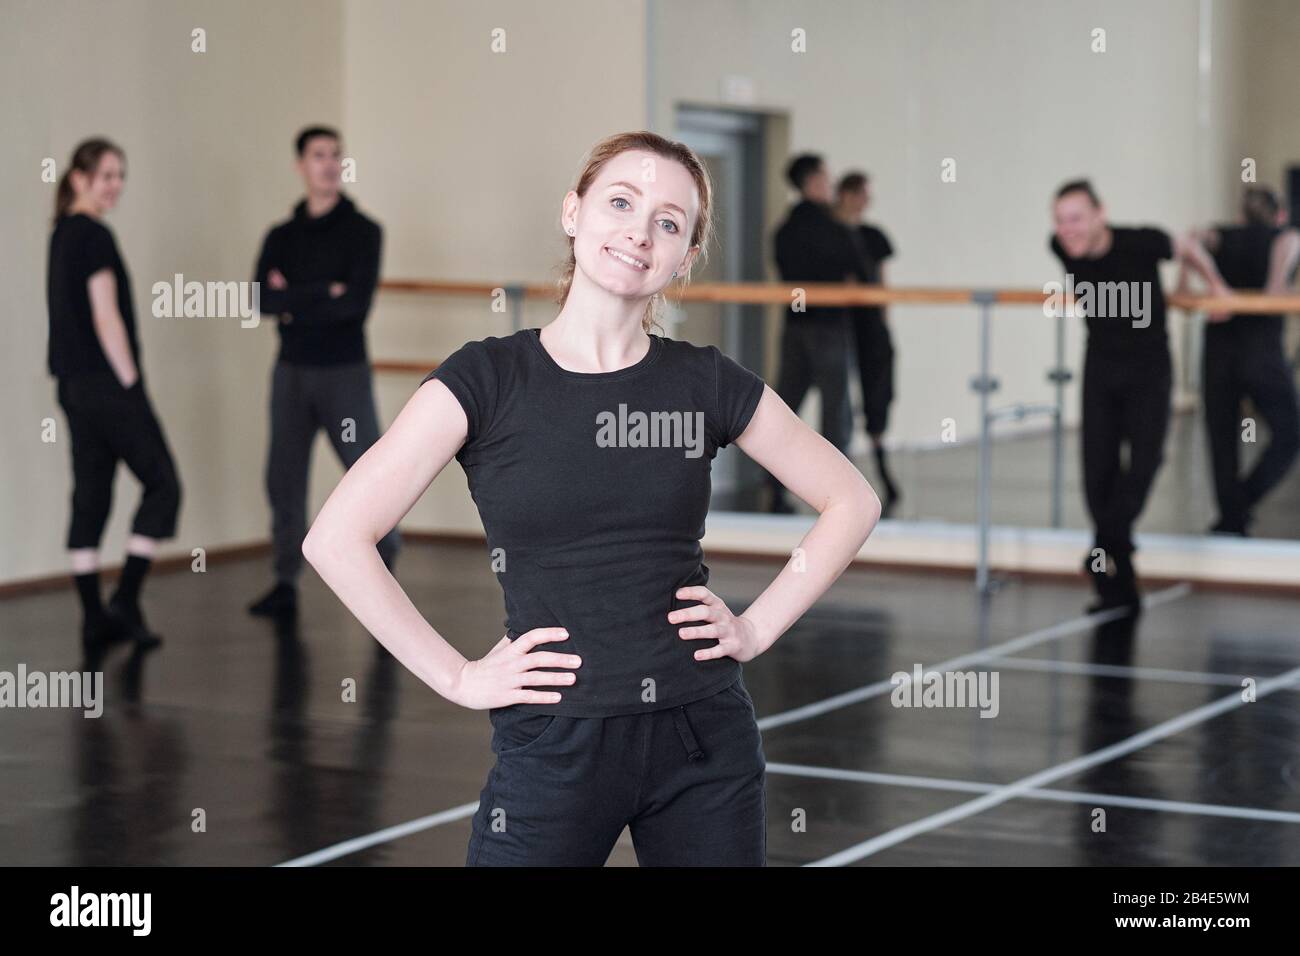 Young cheerful instructor of modern dancing course standing in akimbo pose in front of camera with students on background Stock Photo